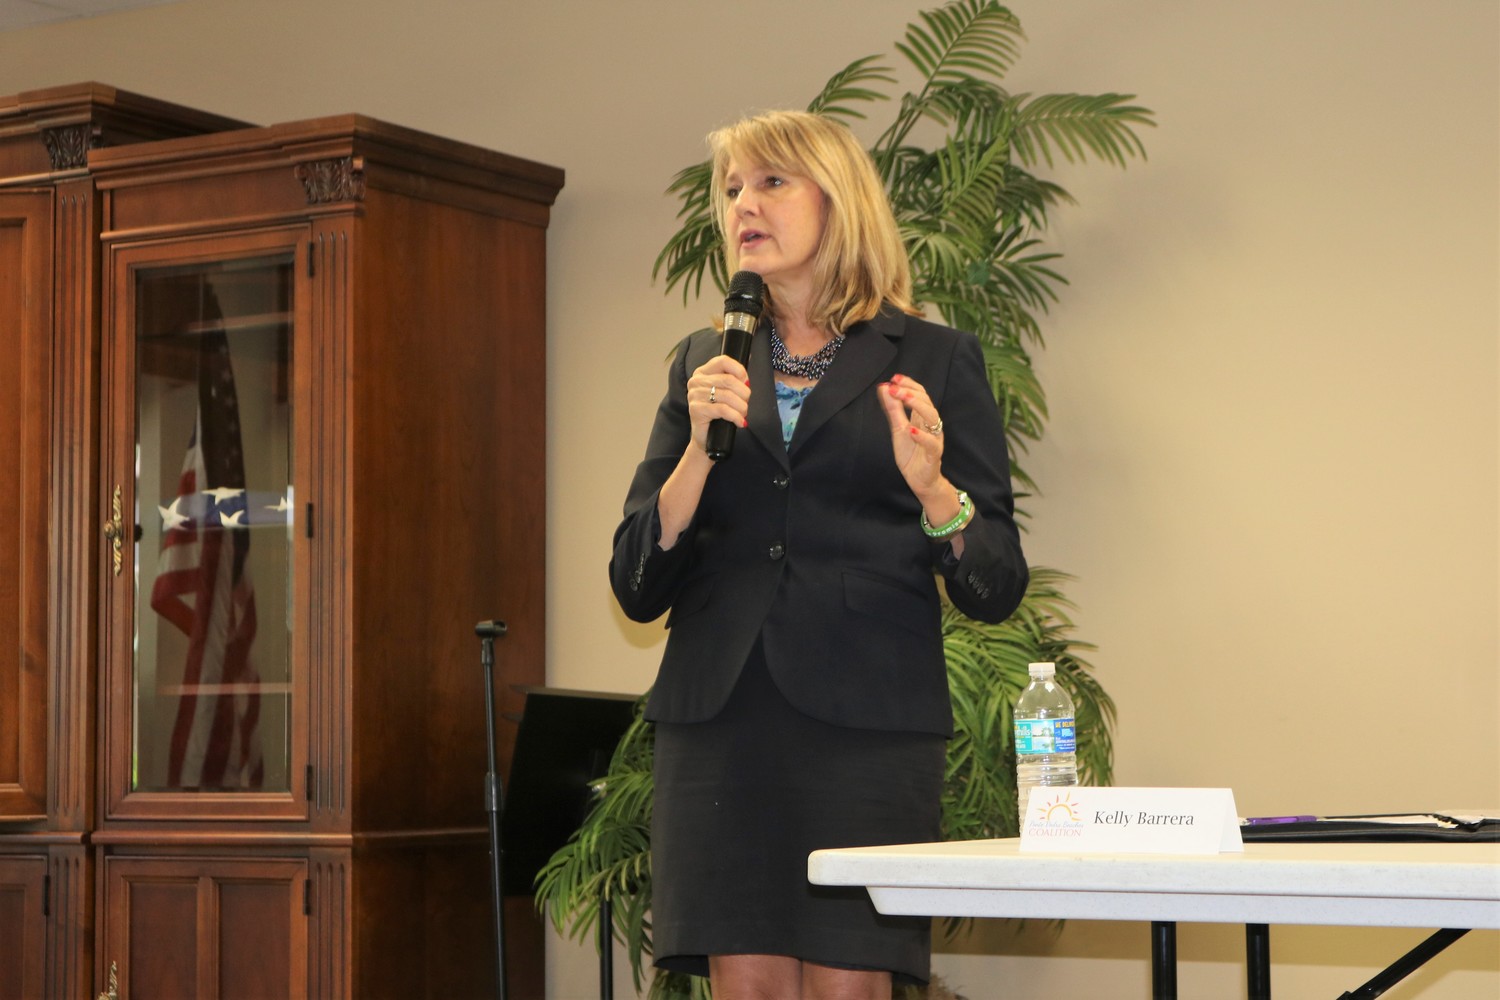 St. Johns County School Board District 4 Representative Kelly Barrera shares her platform at a June 25 candidate forum hosted by the Ponte Vedra Beaches Coalition.